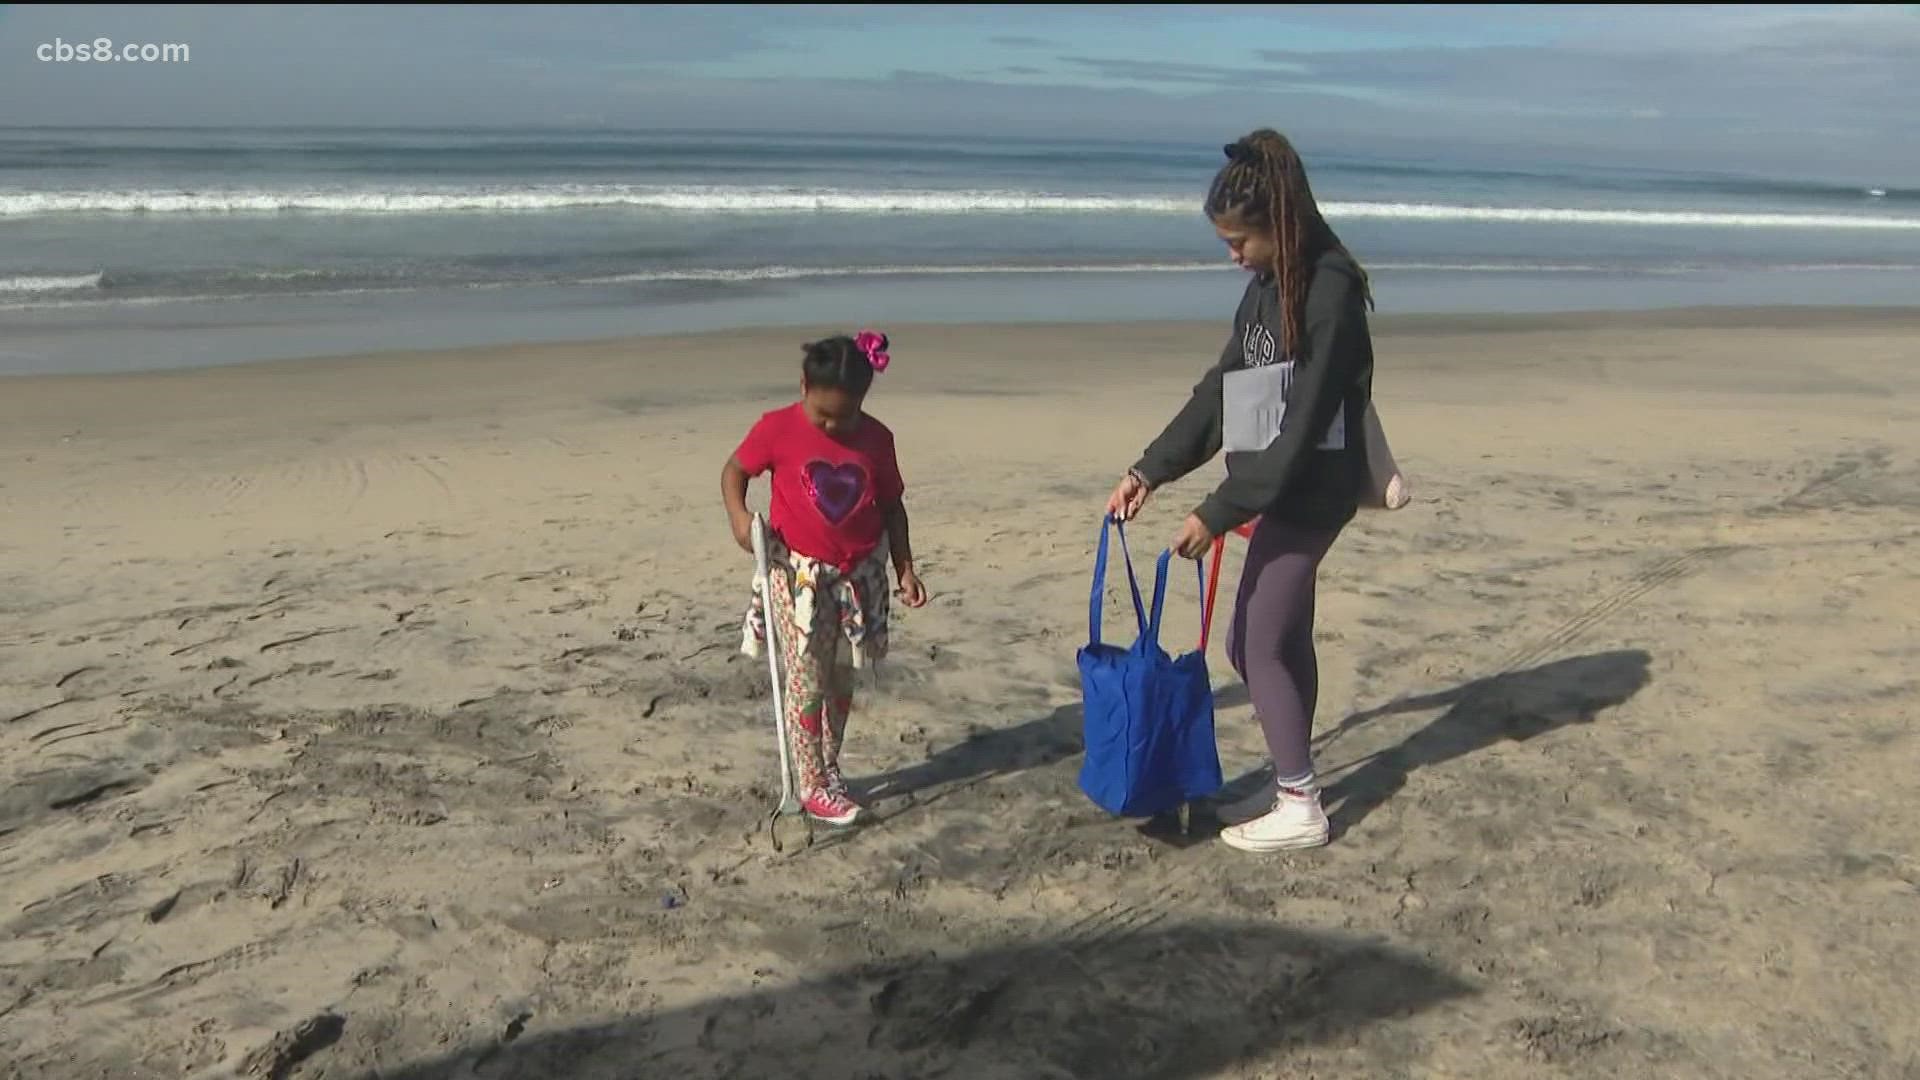 Big Brothers and Big Sisters of San Diego County celebrated Martin Luther King, Jr. Day with a beach cleanup in Imperial Beach.